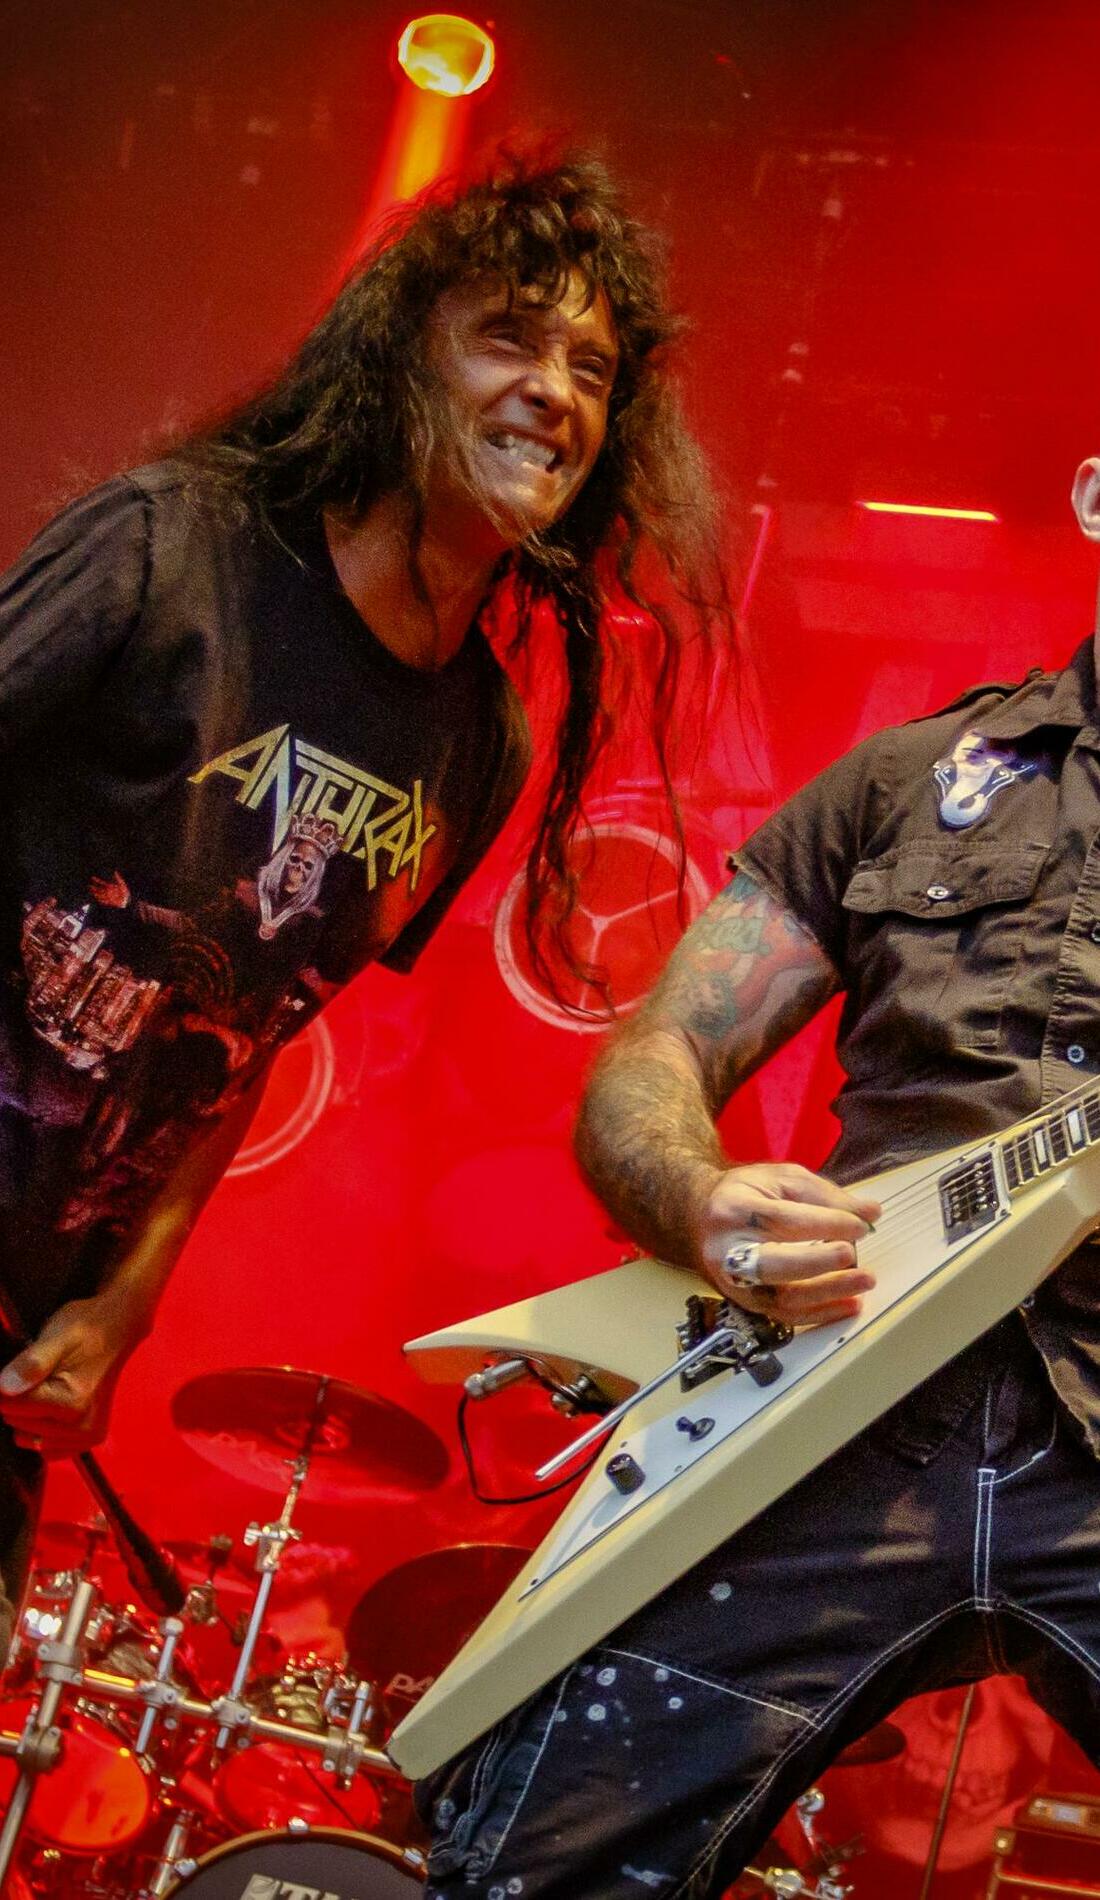 A Anthrax live event